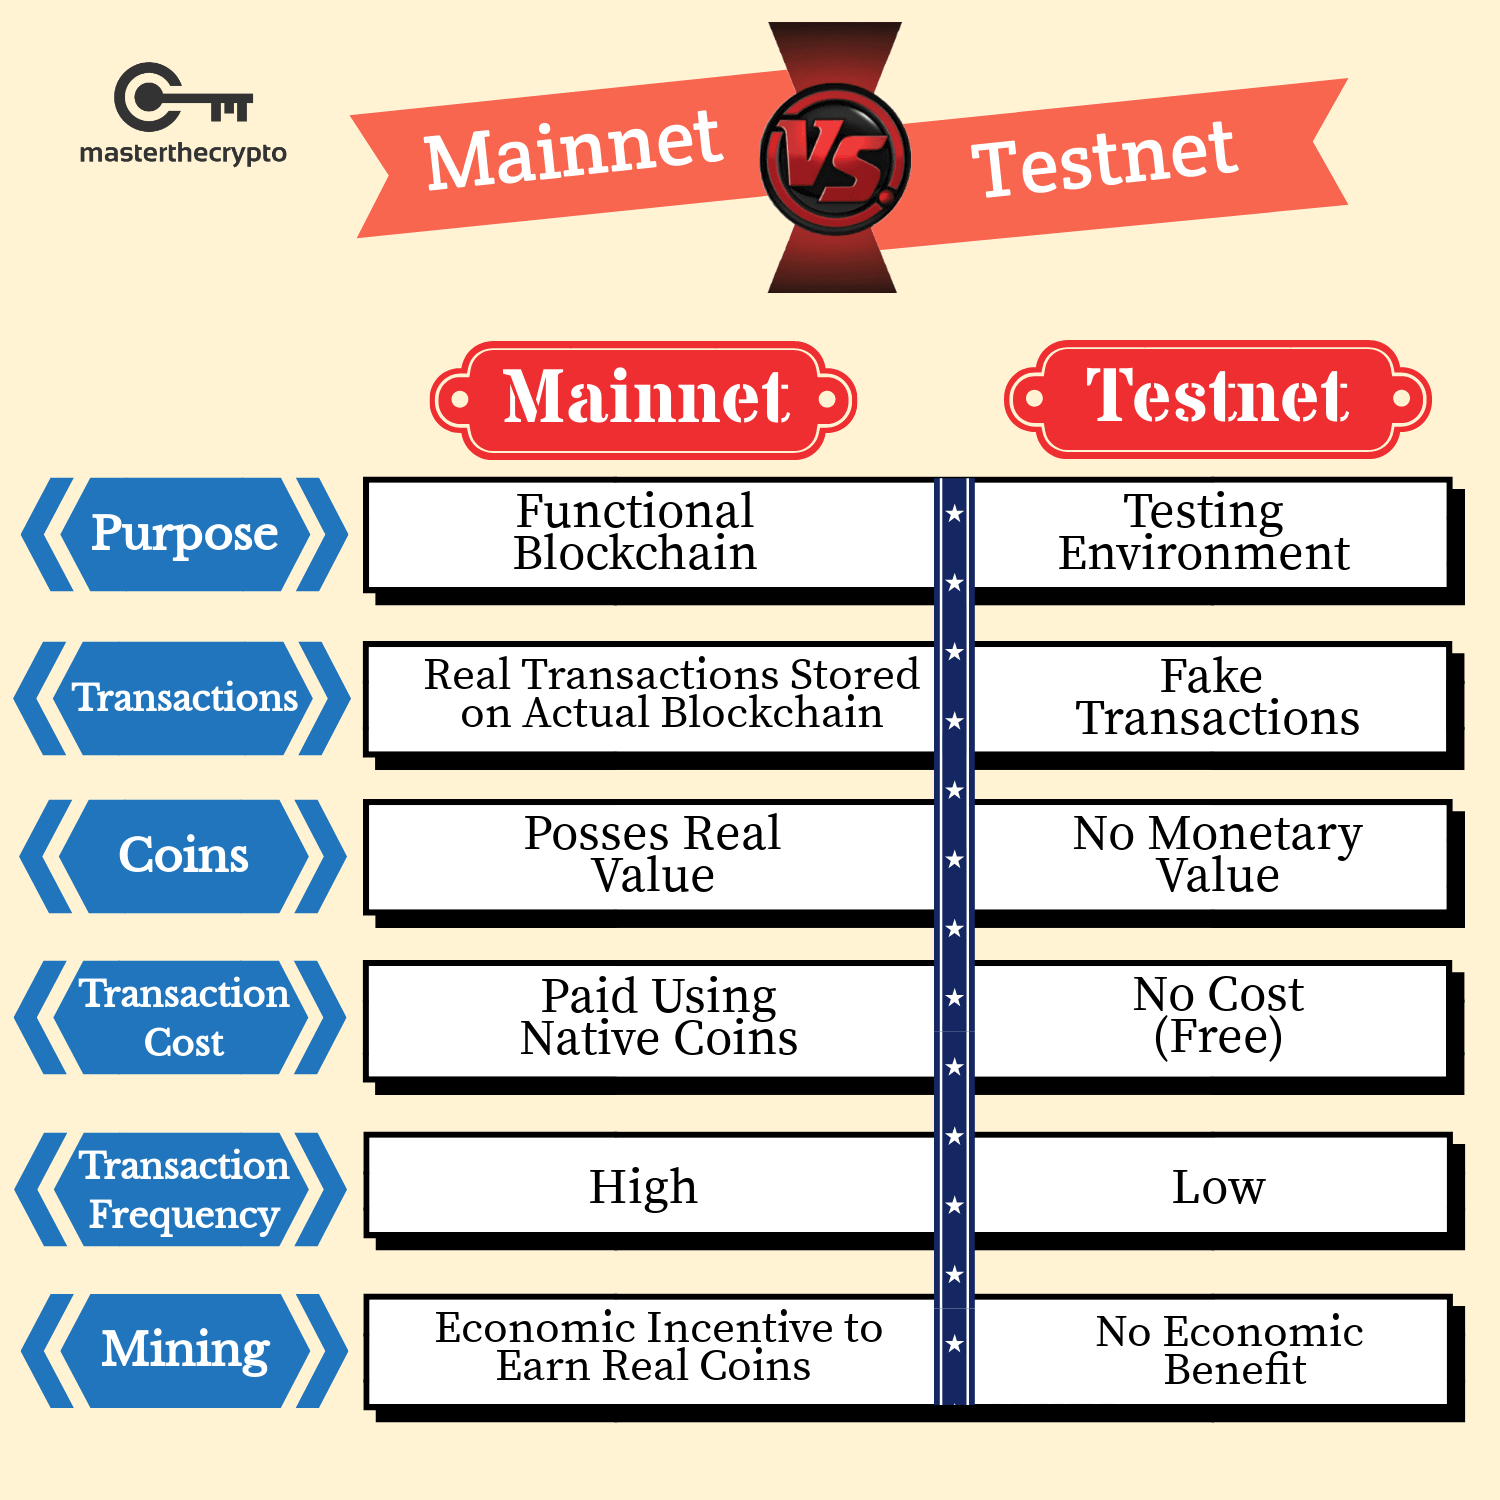 Crypto Mainnet vs Testnet, Difference between mainnet and testnet, Mainnet vs Testnet, Mainnet, Testnet